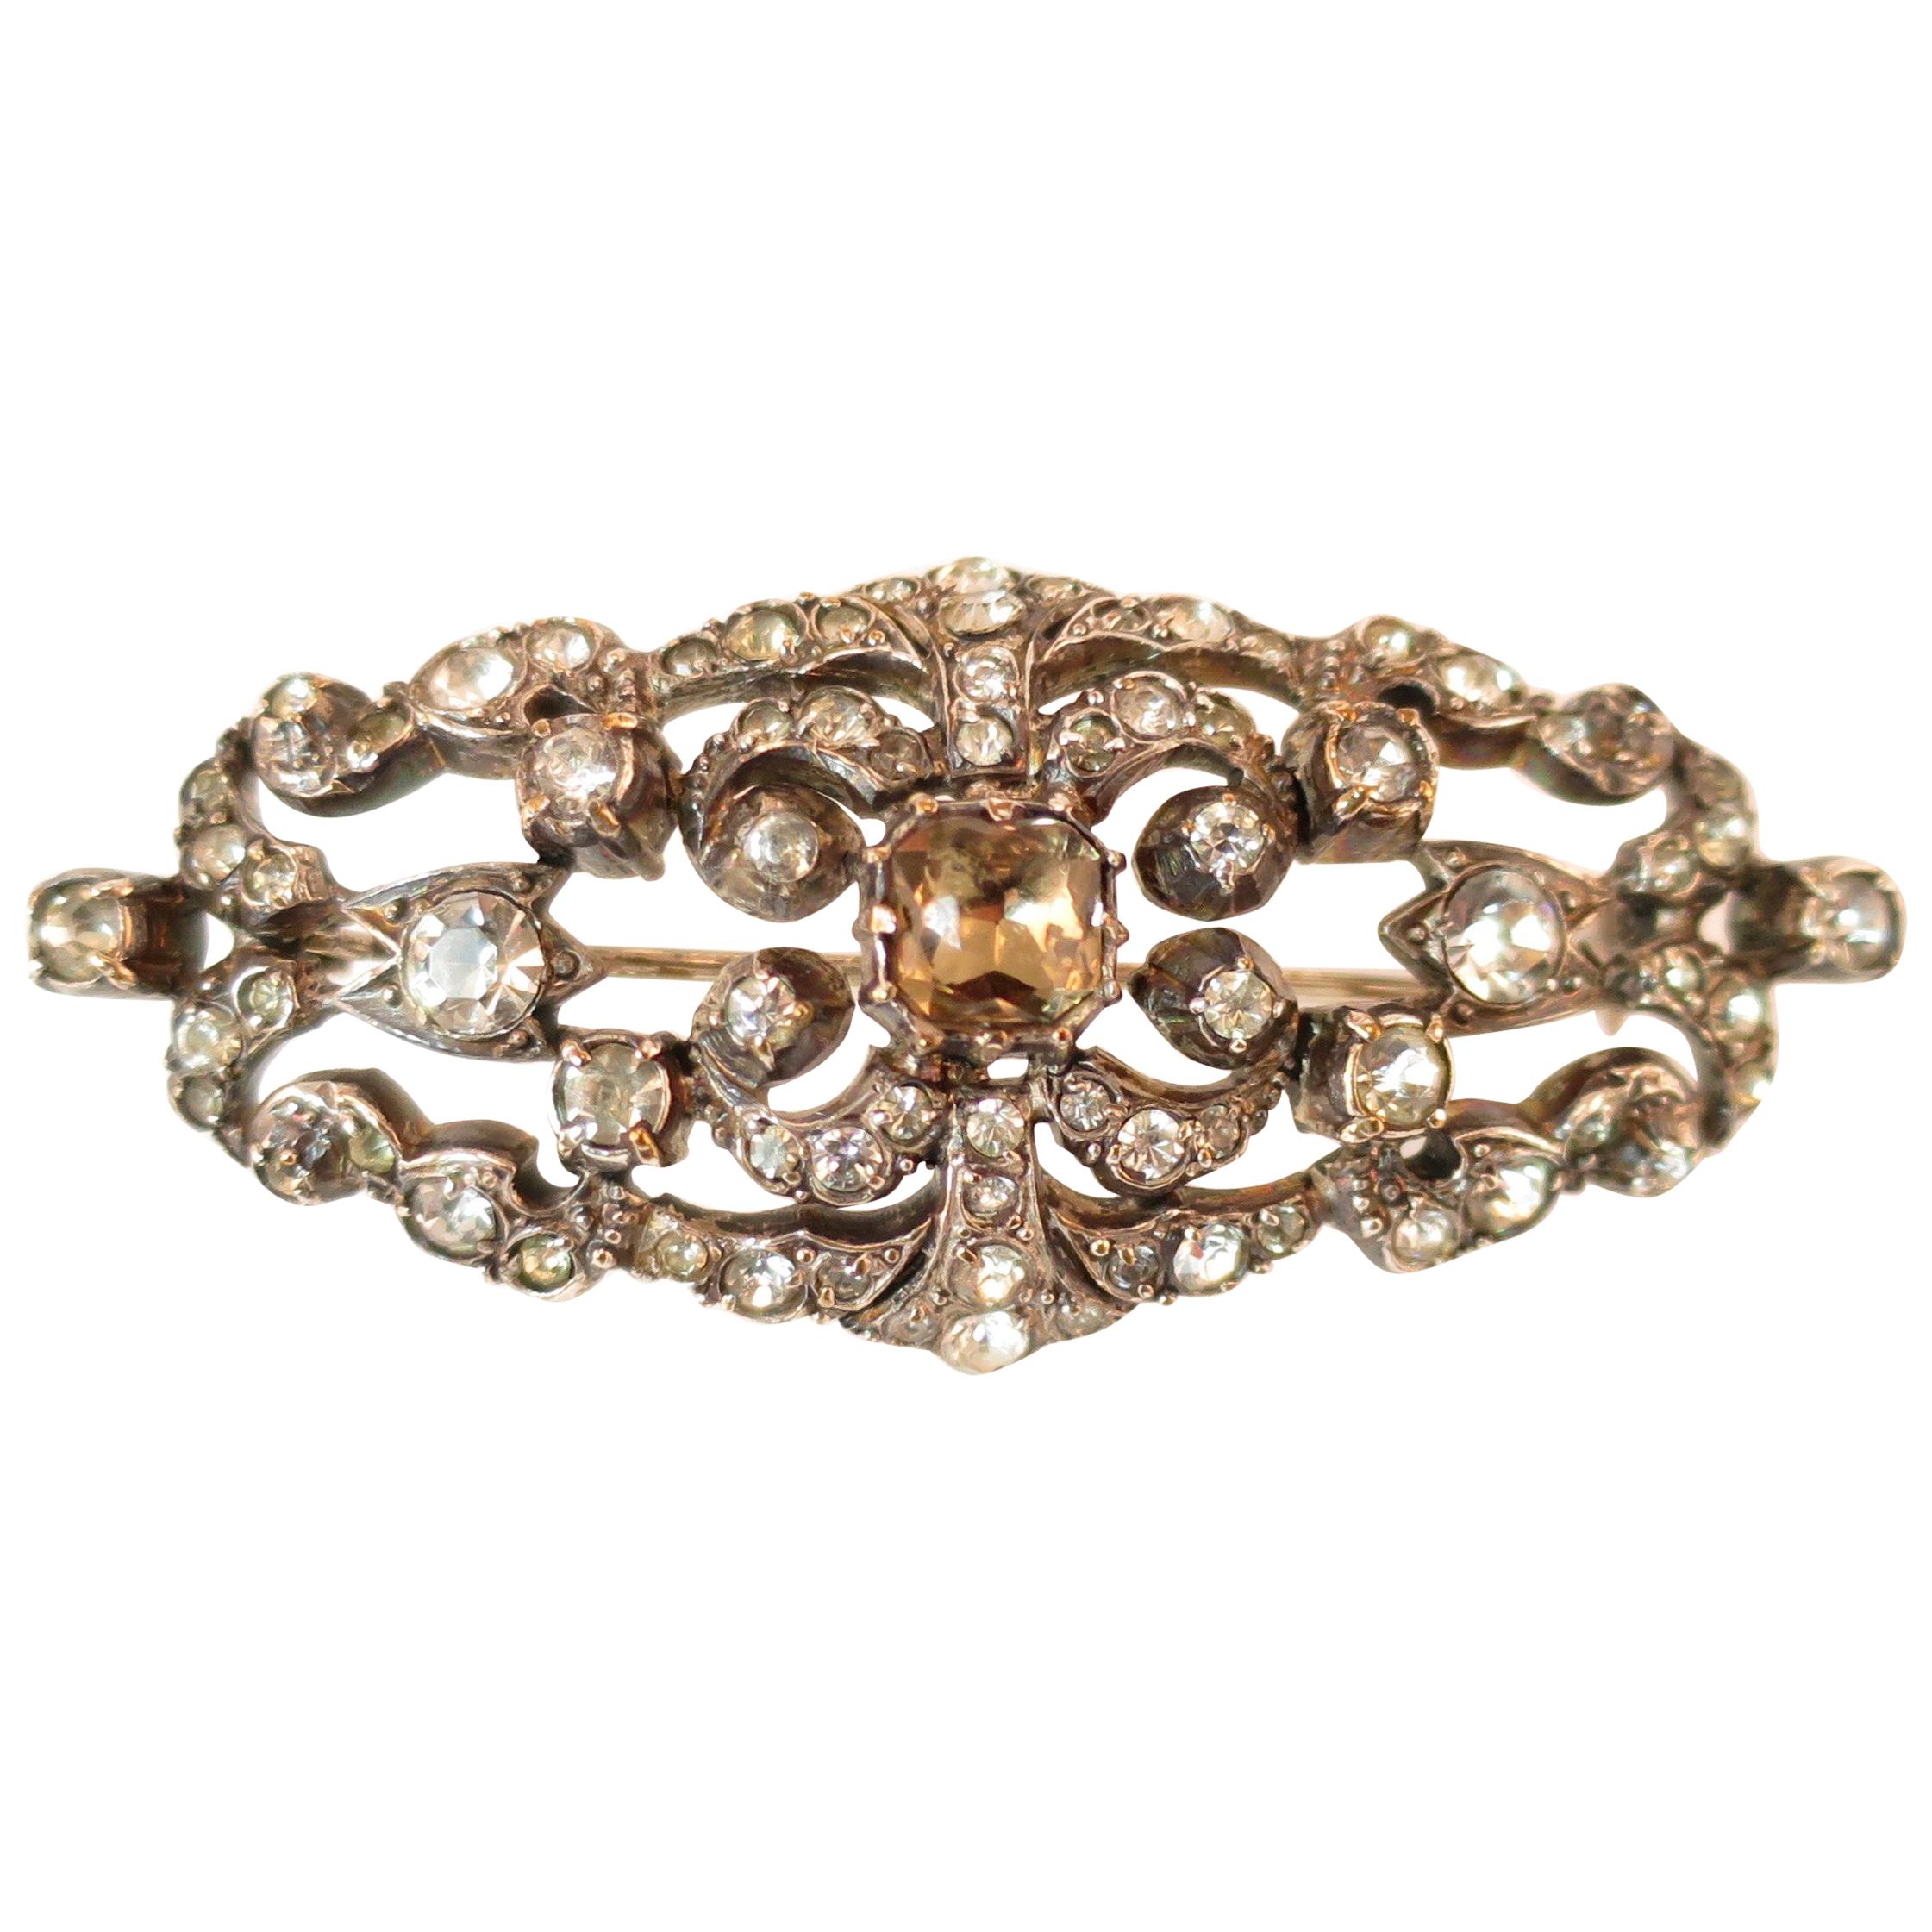 Edwardian Hand-Wrought Sterling & French Paste Brooch Circa 1905 For Sale